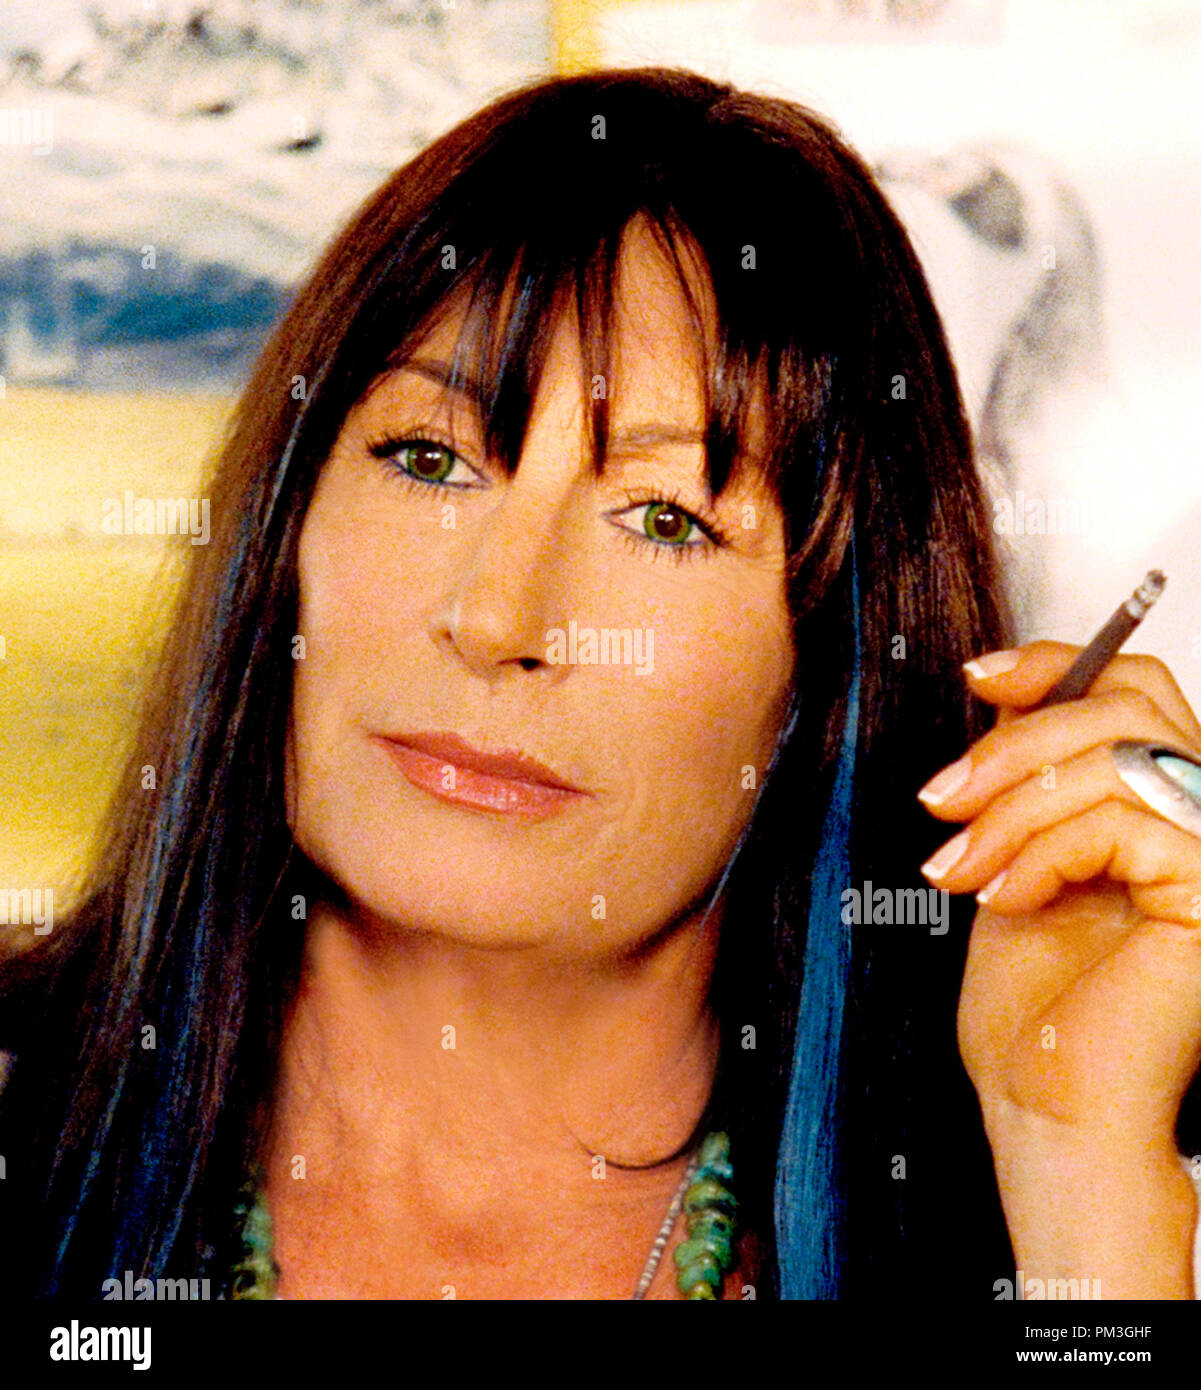 Film Still from 'The Life Aquatic with Steve Zissou' Anjelica Huston © 2004 Touchstone Pictures File Reference # 307351154THA  For Editorial Use Only -  All Rights Reserved Stock Photo